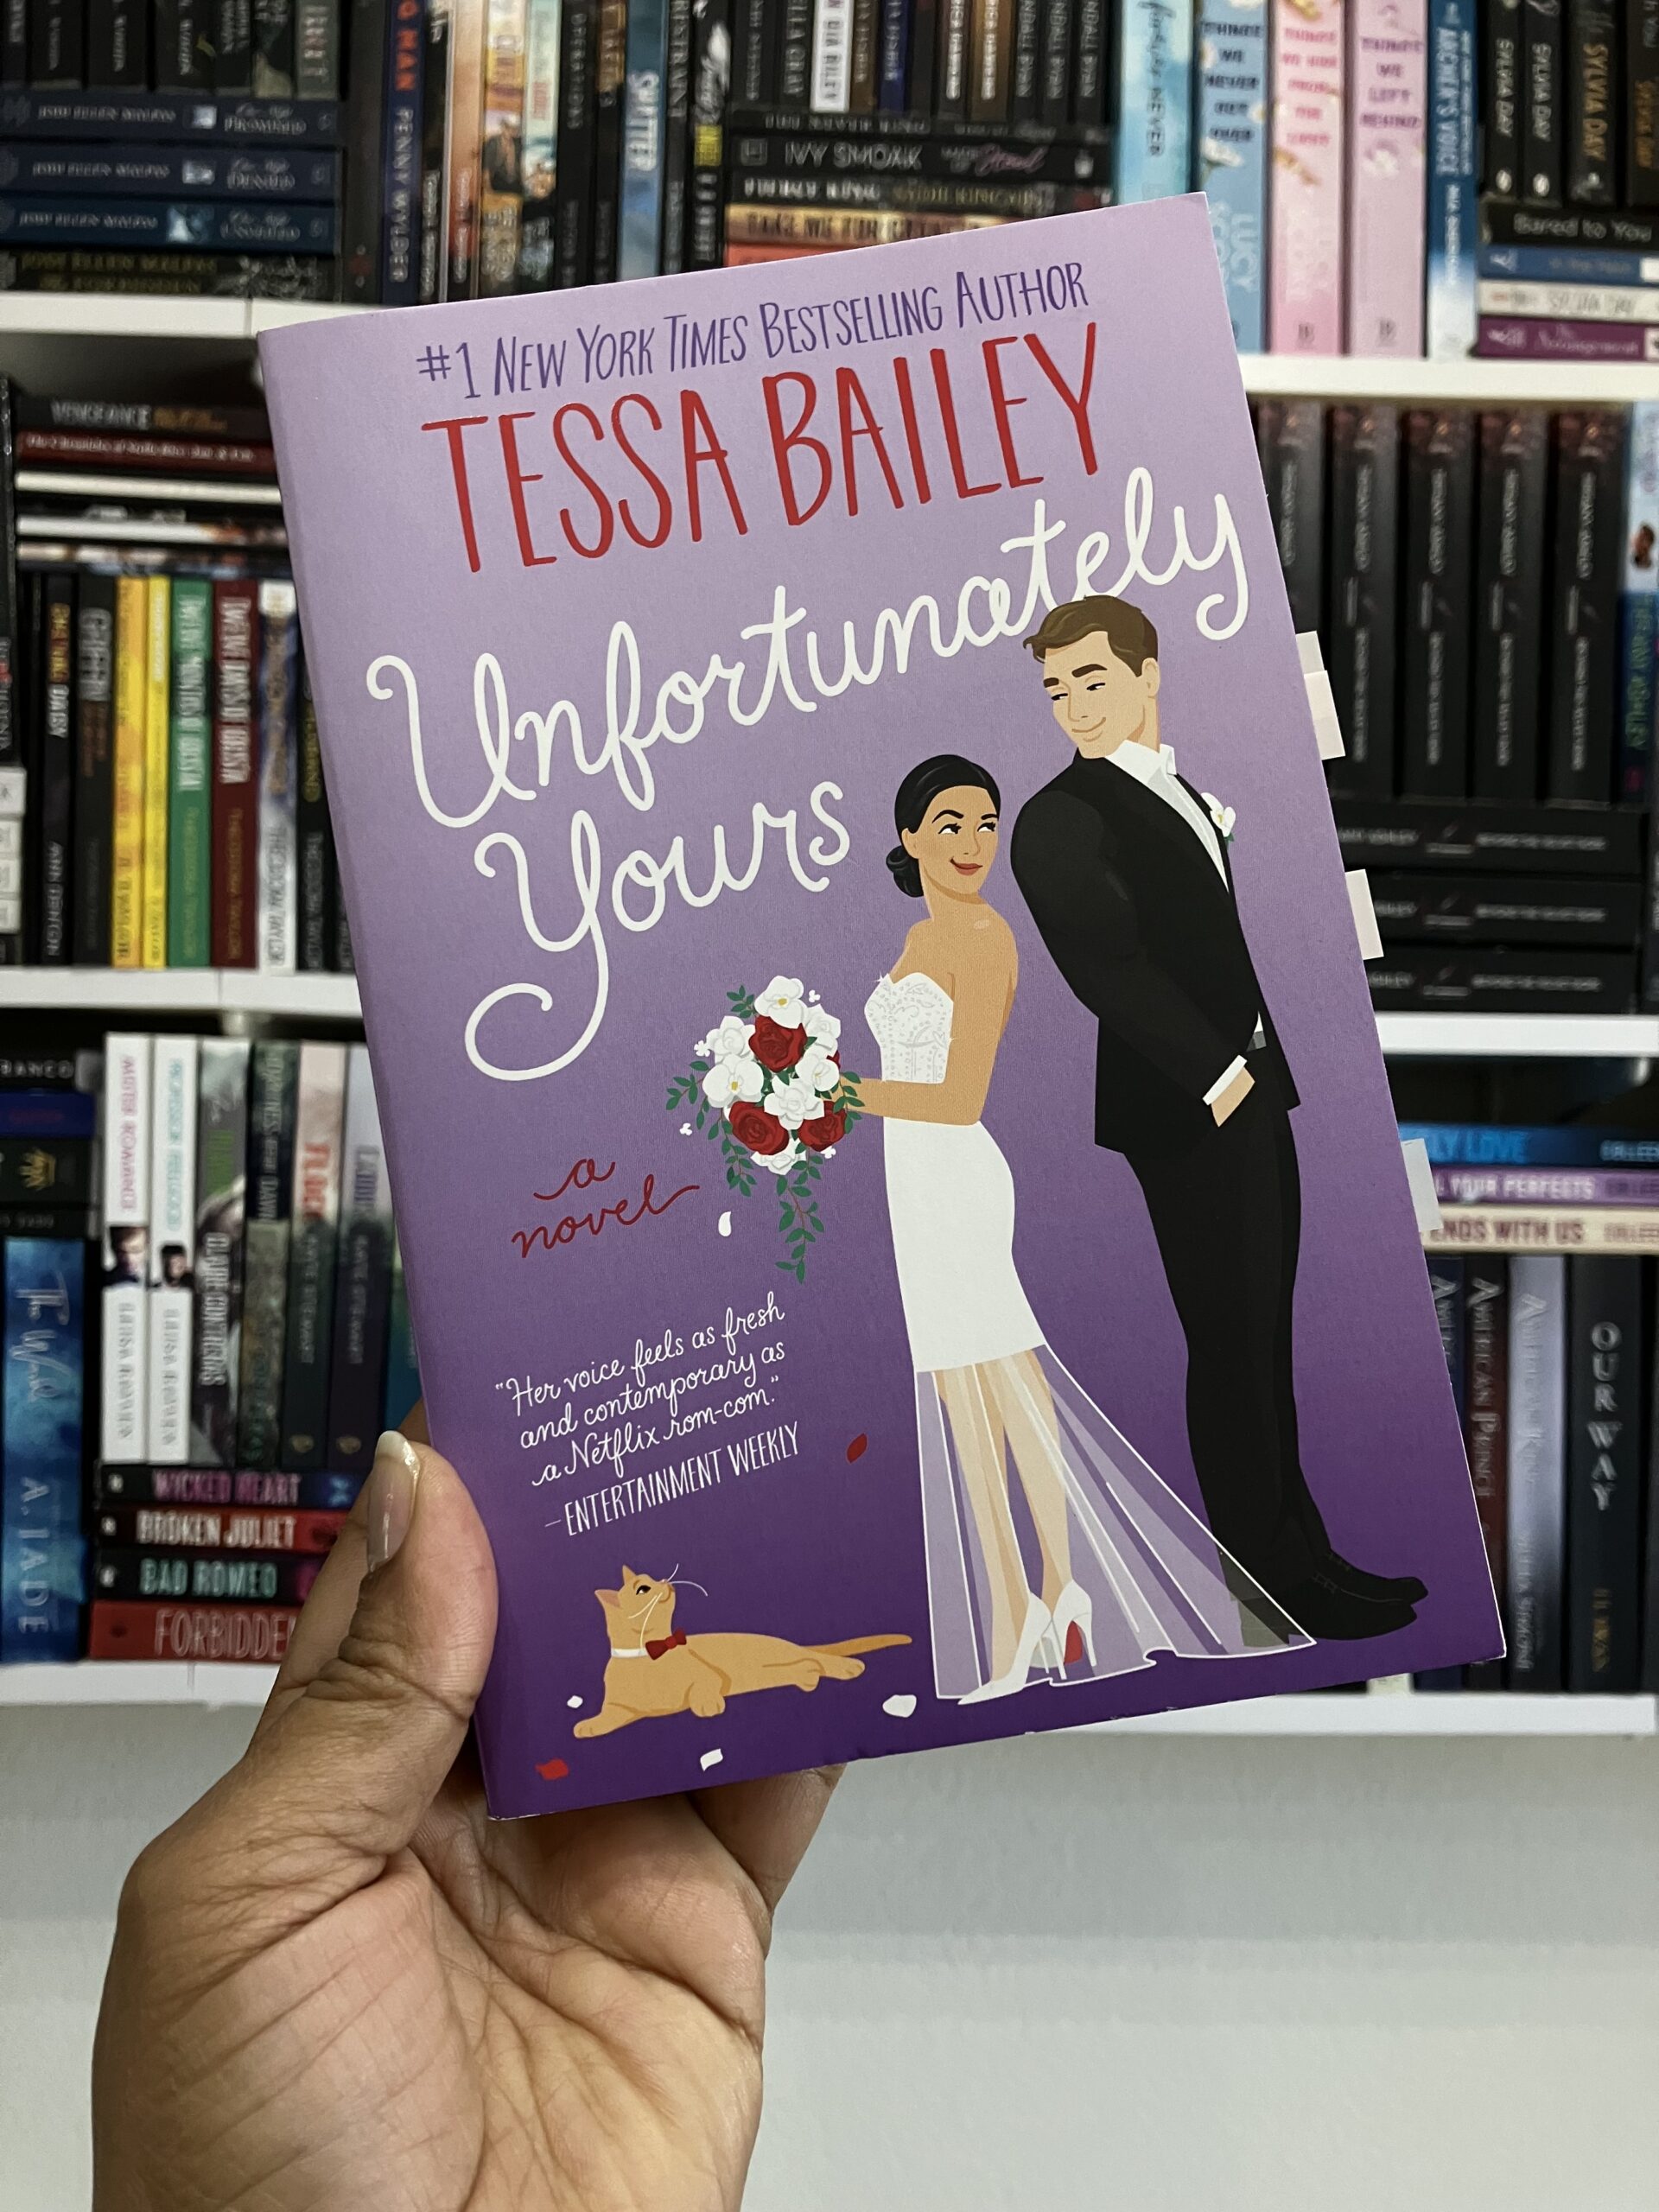 Unfortunately Yours by Tessa Bailey